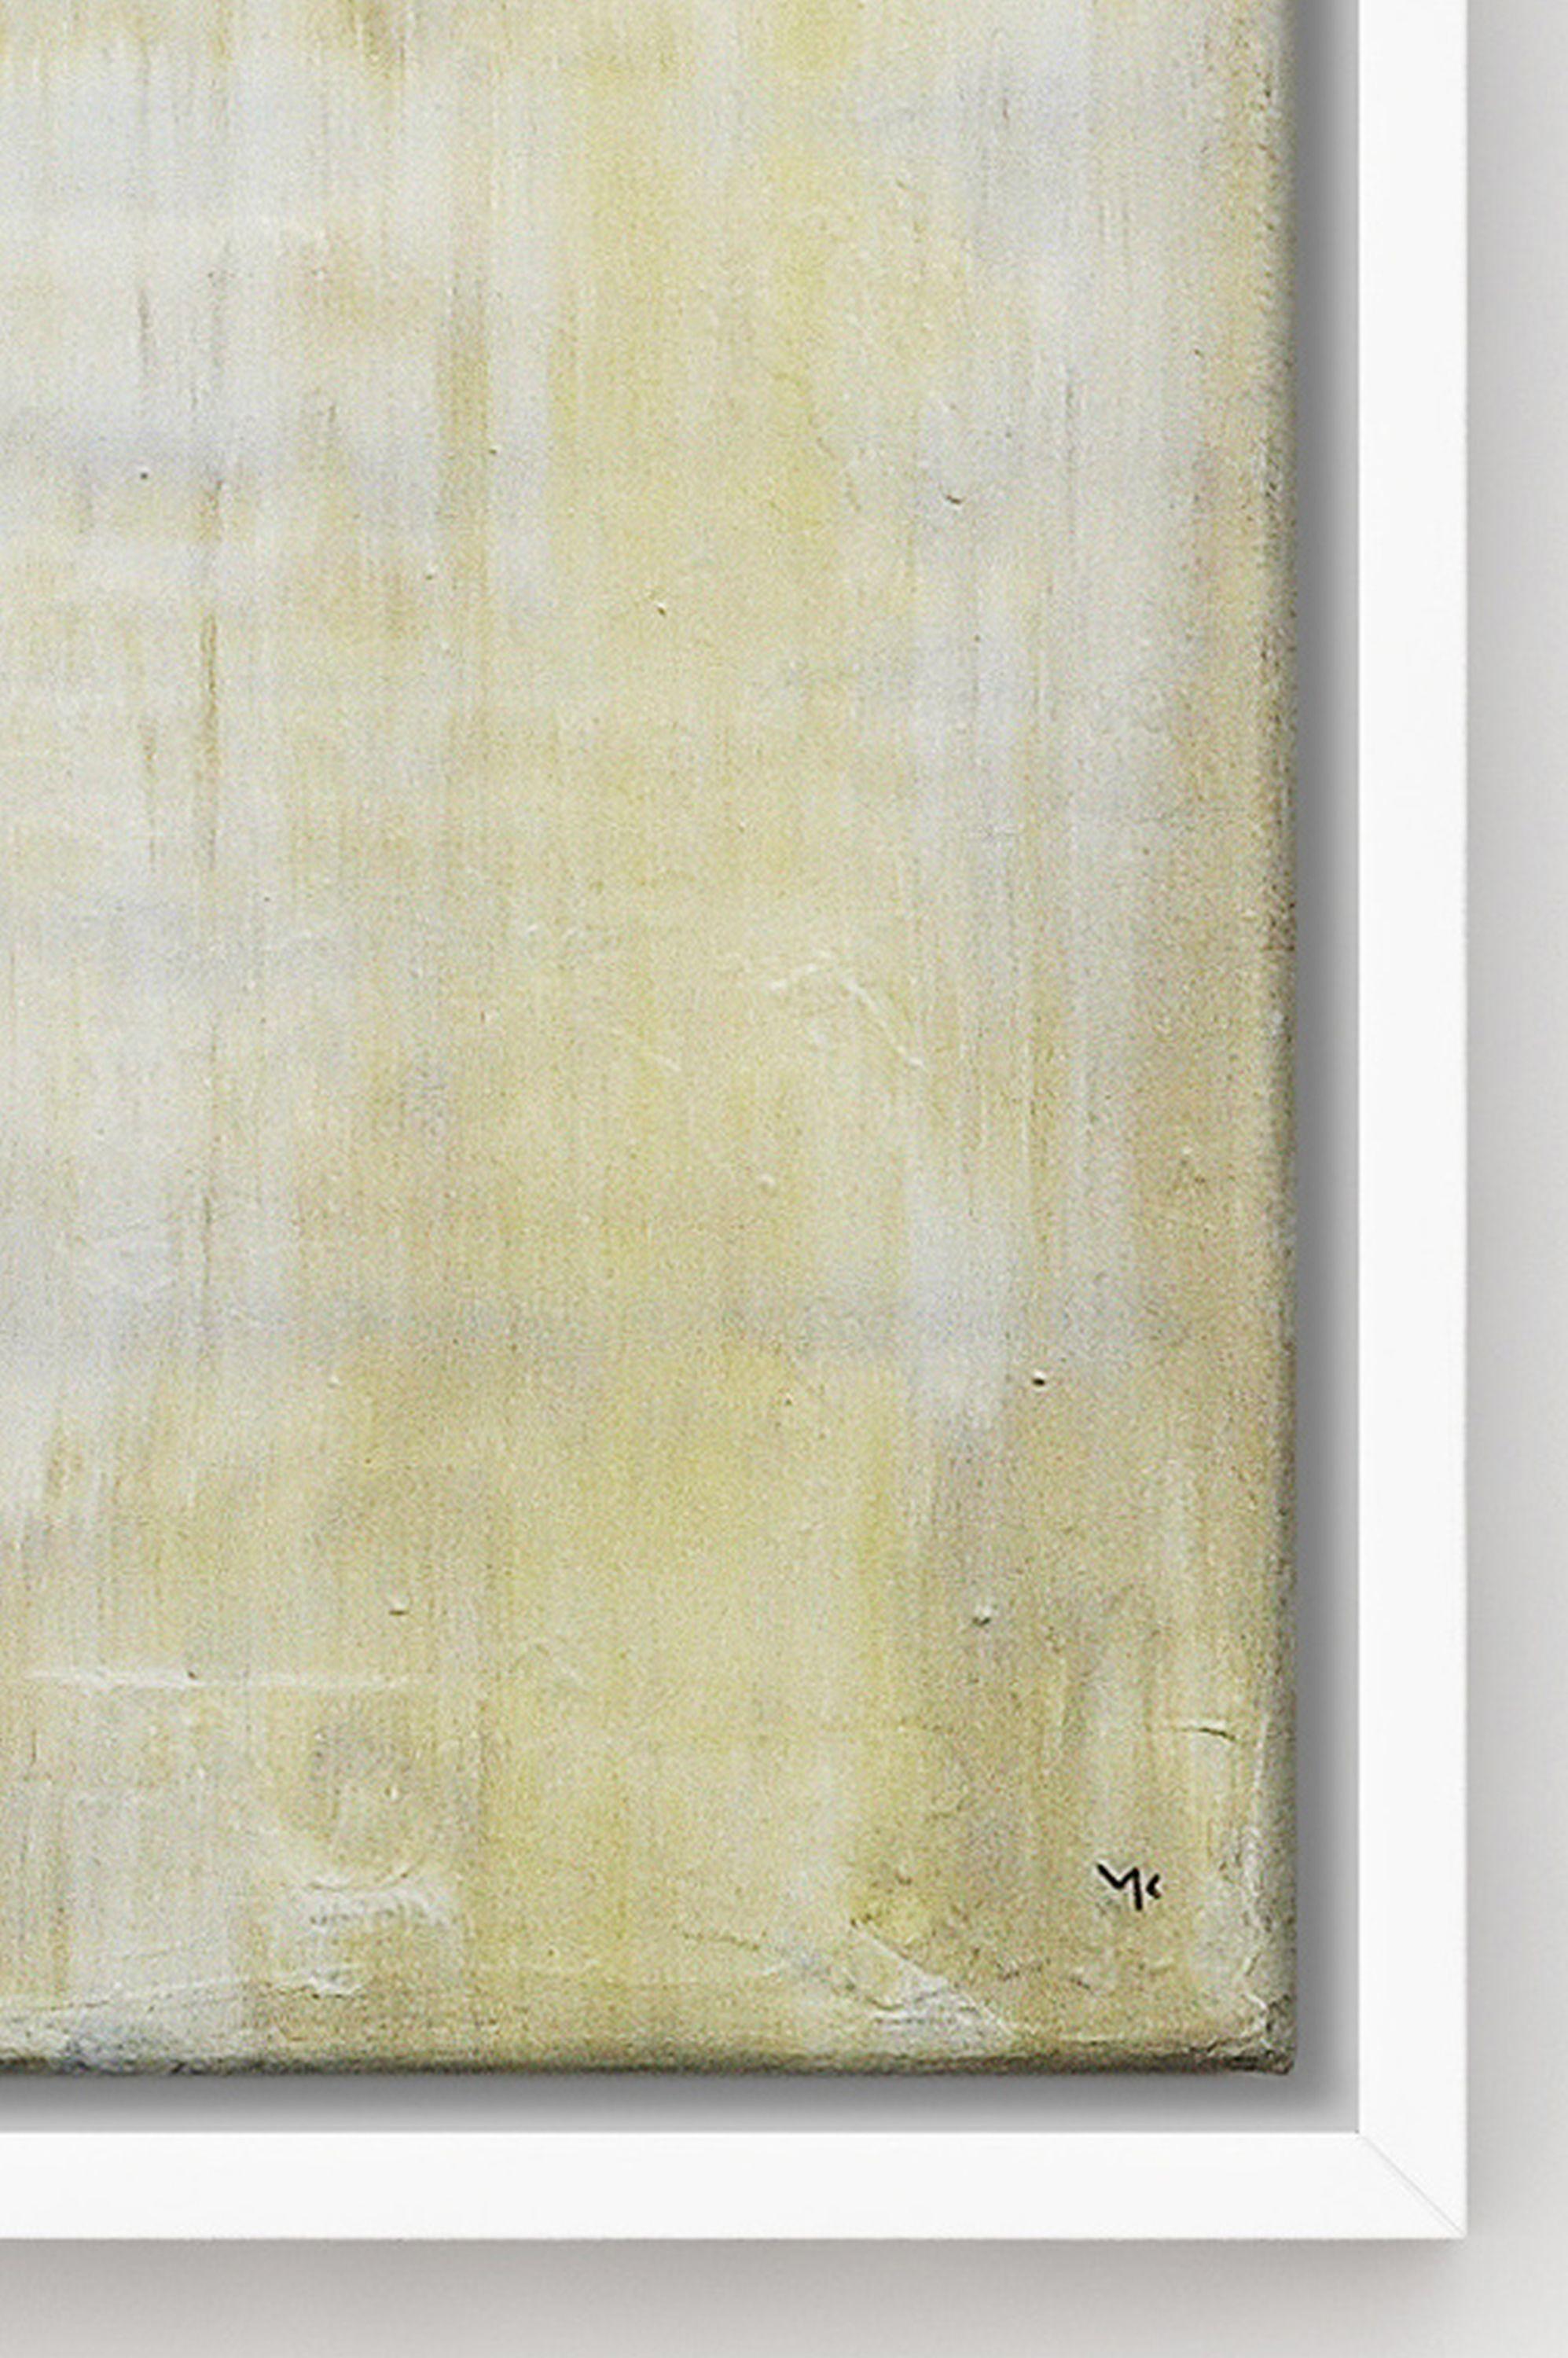 Title: Smooth Ivory    Artwork ID: MK201924    Created: 2019, signed and dated    Size: 30x70cm  11,8x27,6in    Medium: Acrylic on Canvas    Original abstract painting by Max Kulich. Hand painted with high quality acrylic colors on stretched canvas.